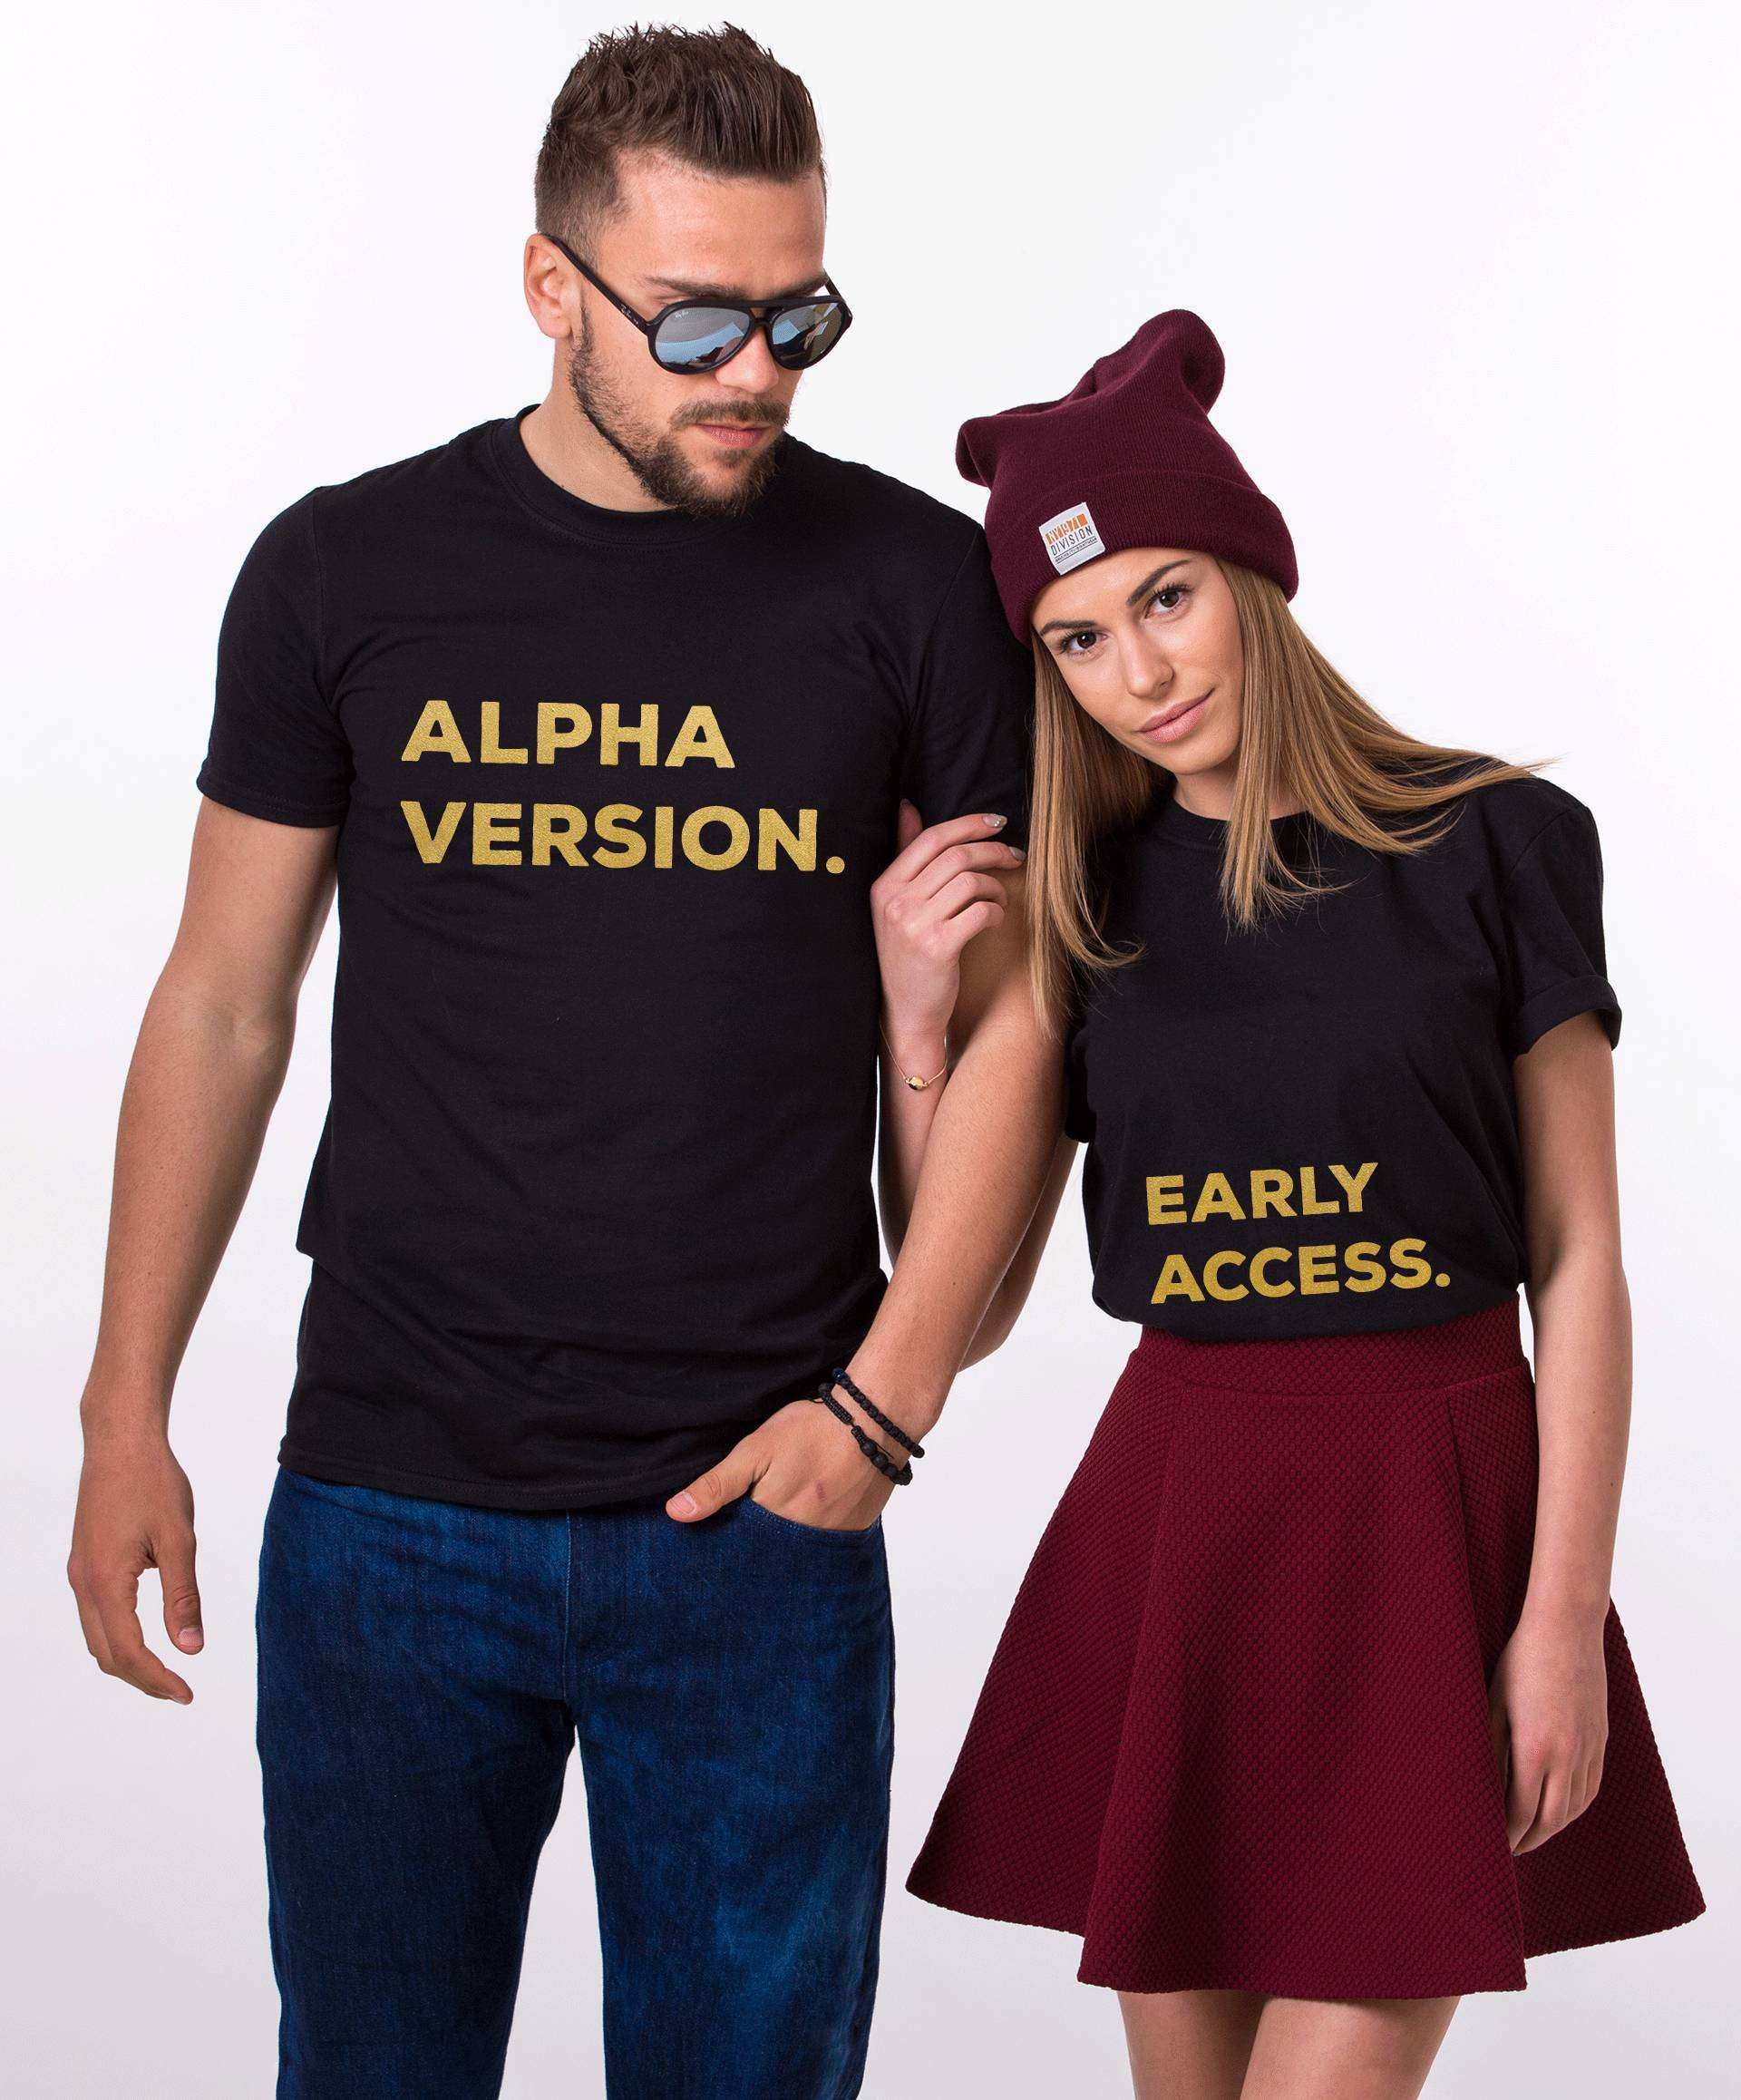 Alpha Version Early Access Pregnancy Shirts, Matching Couples Shirts